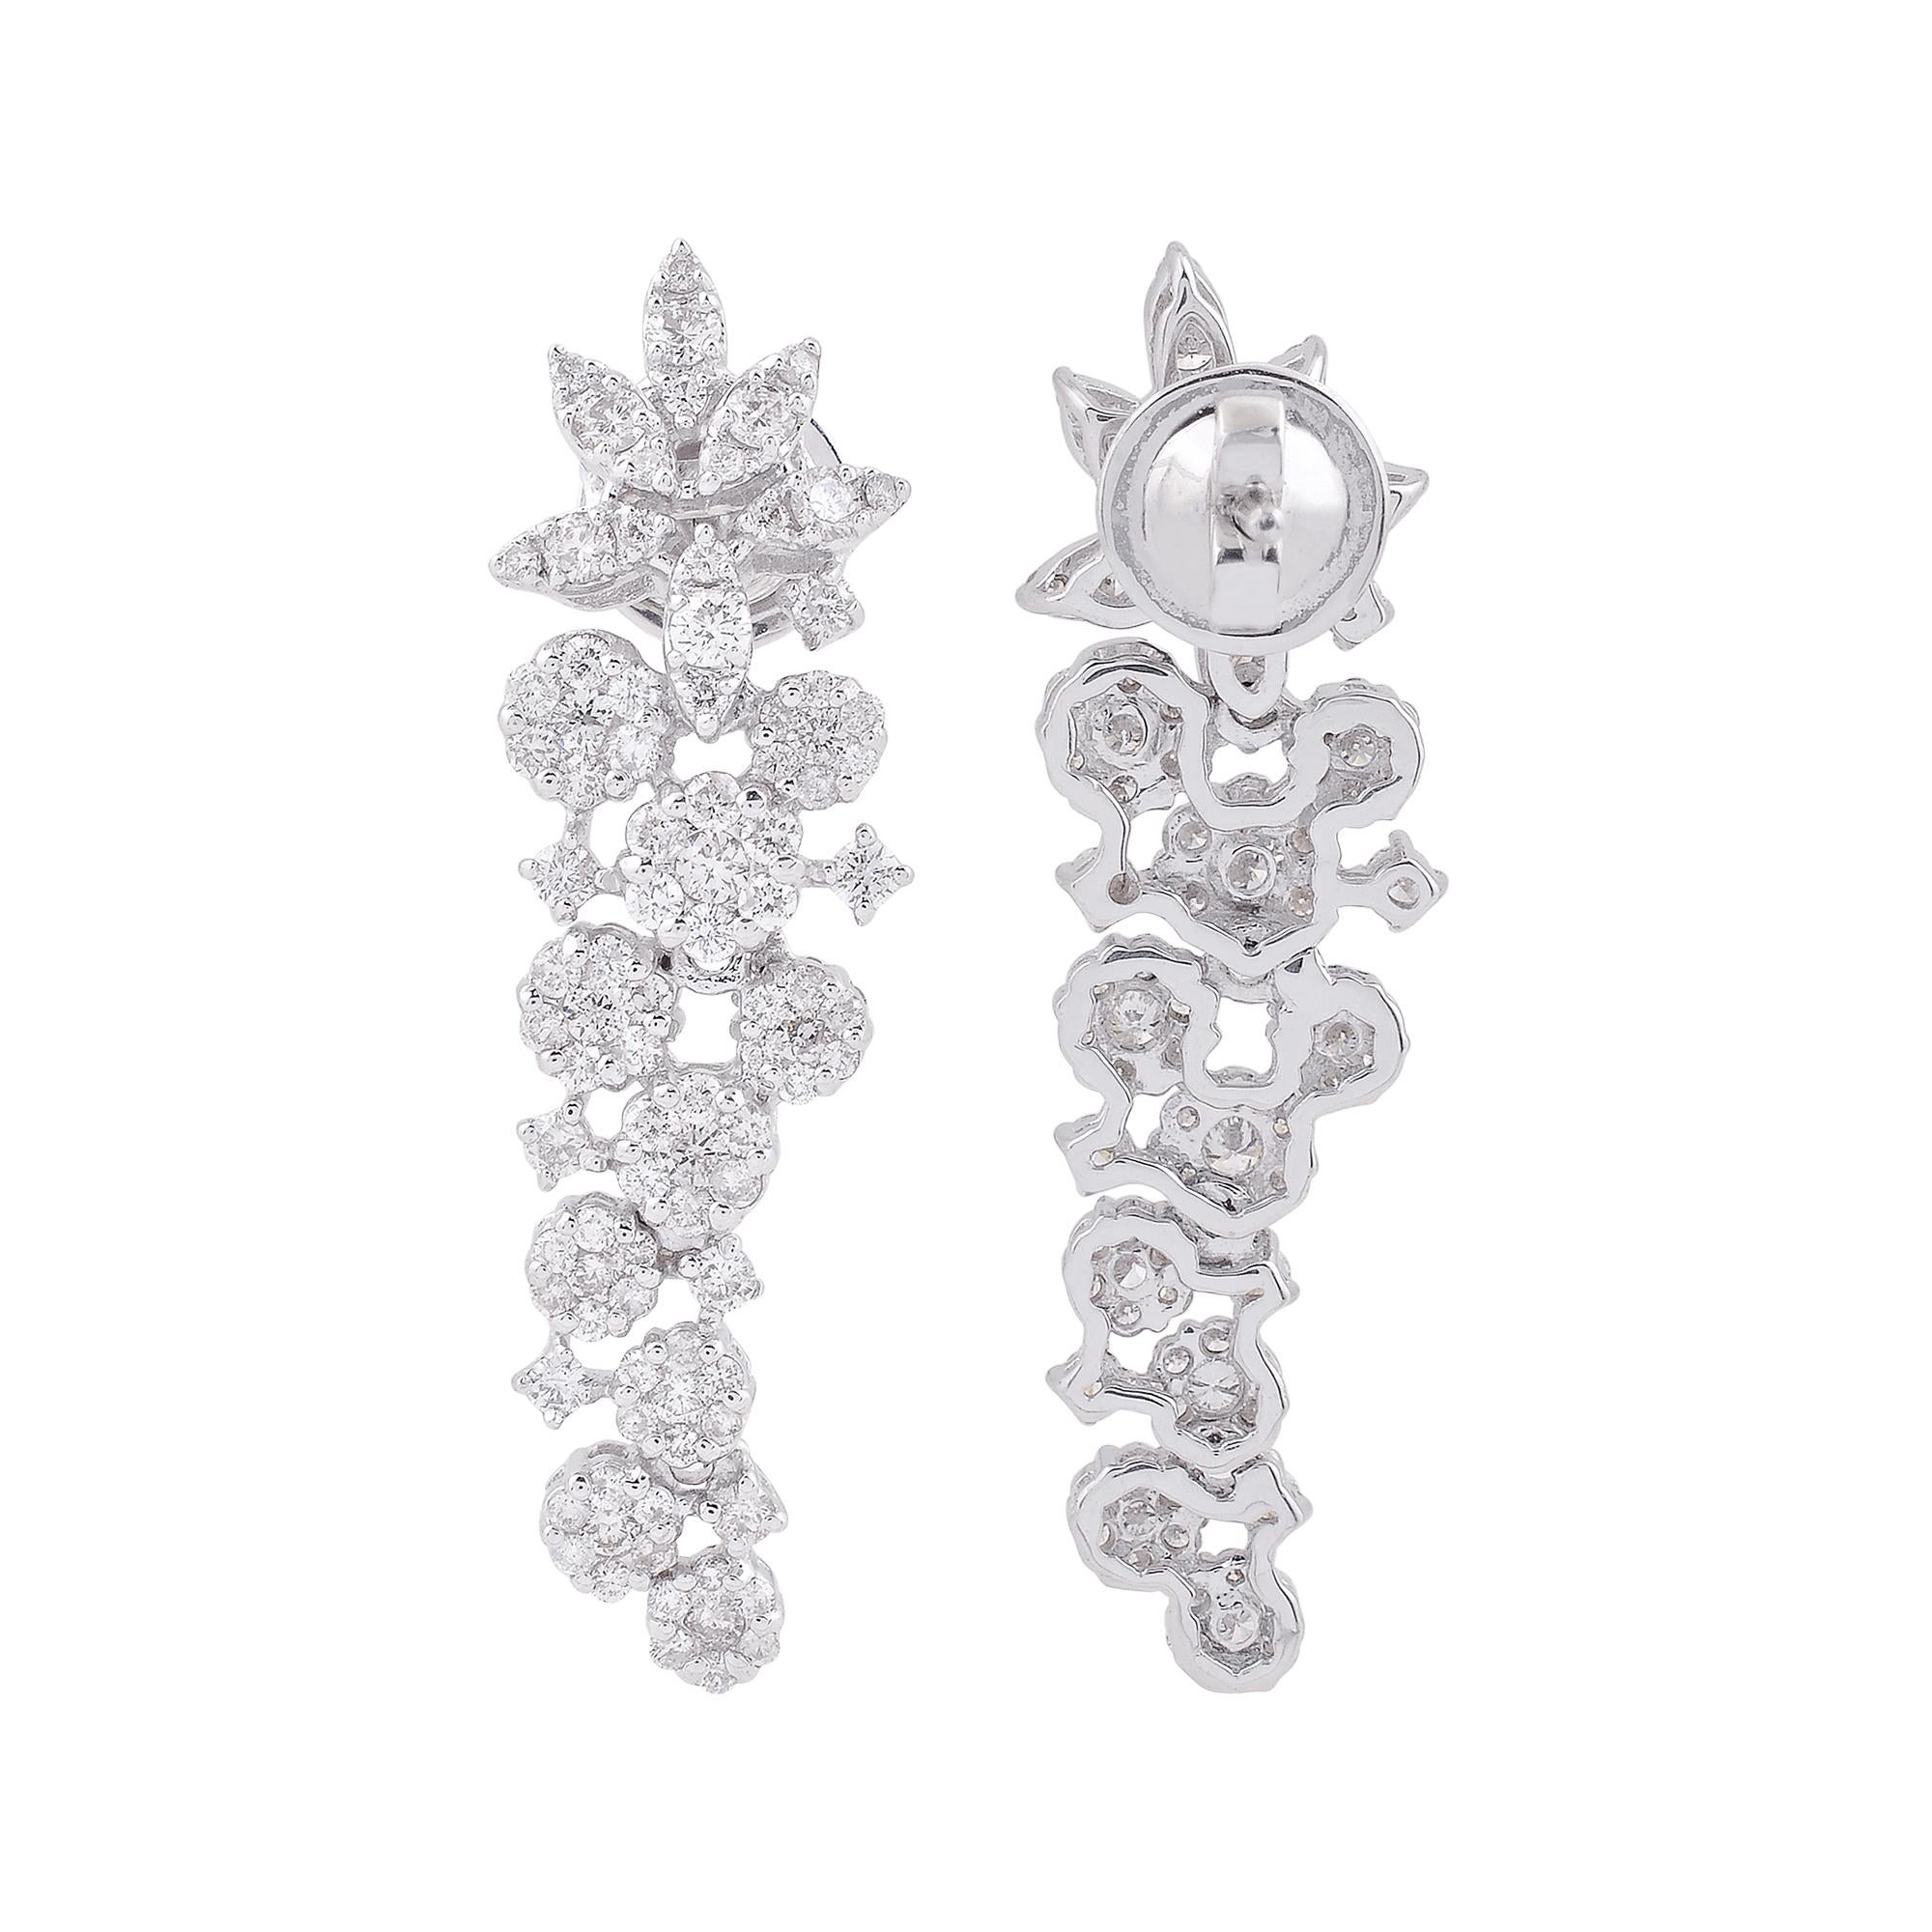 Item Code :- SEE-1549
Gross Wt. :- 7.77 gm
18k Solid White Gold Wt. :- 7.33 gm
Natural Diamond Wt. :- 2.20 Ct. ( AVERAGE DIAMOND CLARITY SI1-SI2 & COLOR H-I )
Earrings Size :- 37 mm approx.

✦ Sizing
.....................
We can adjust most items to